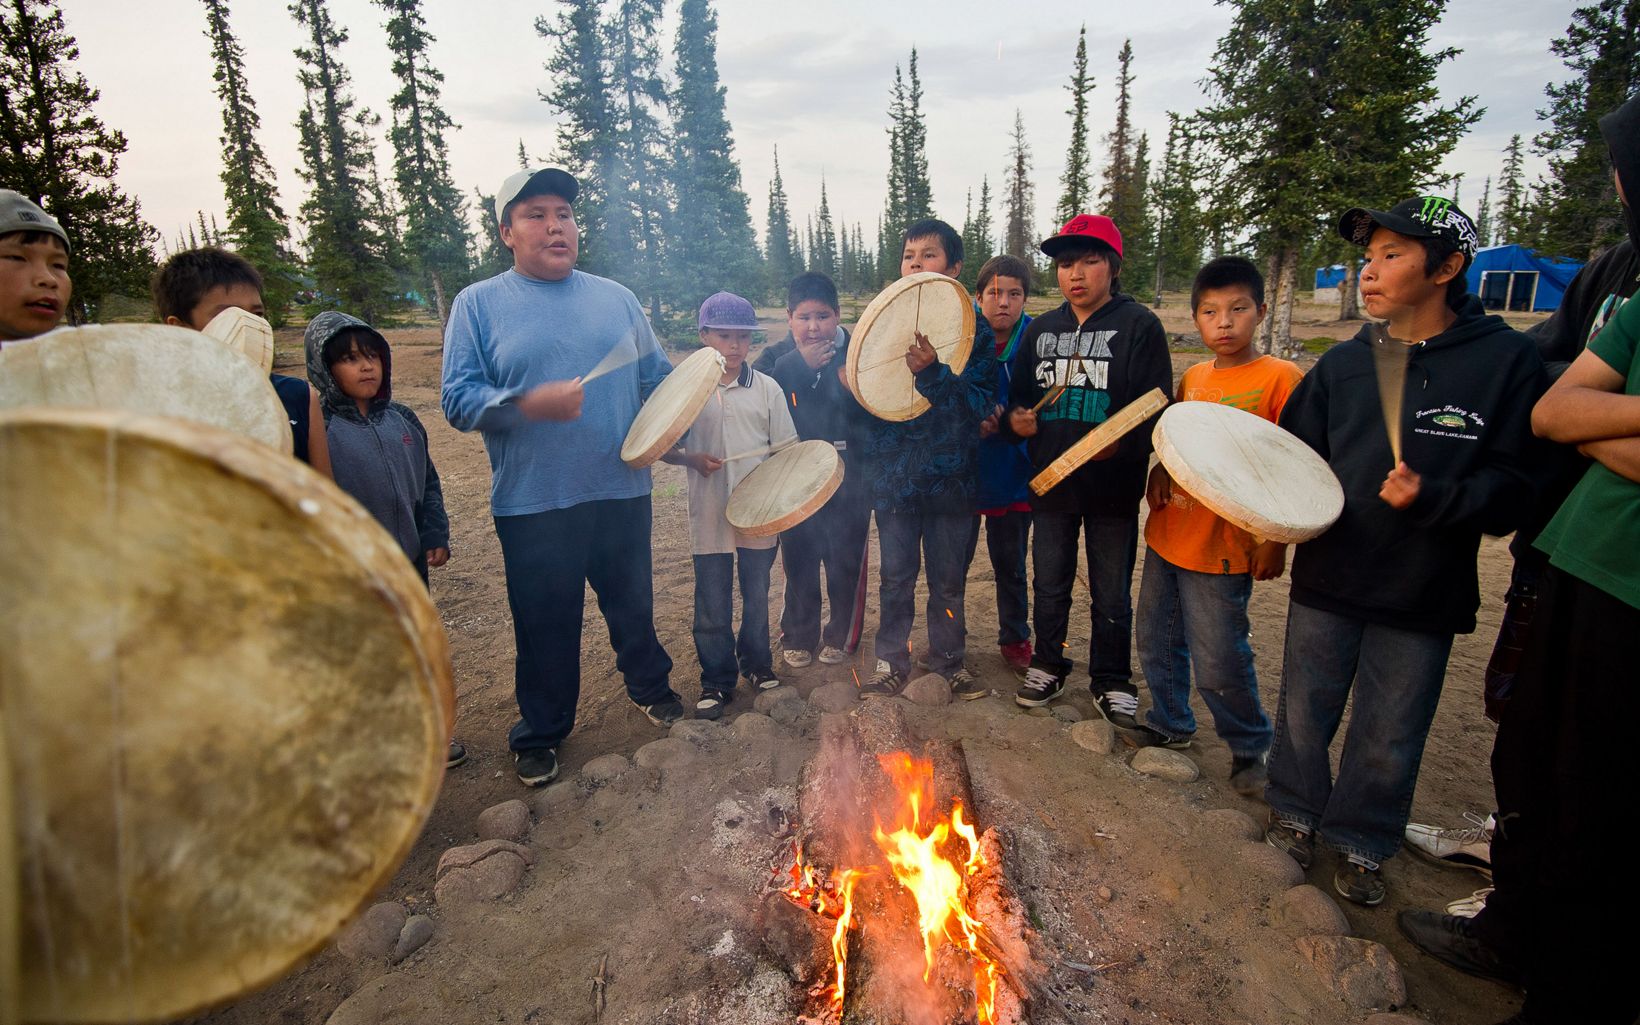 Dene First Nation youth beat drums around a fire during a spiritual gathering after returning from a canoe trip on the Upper Thelon River.